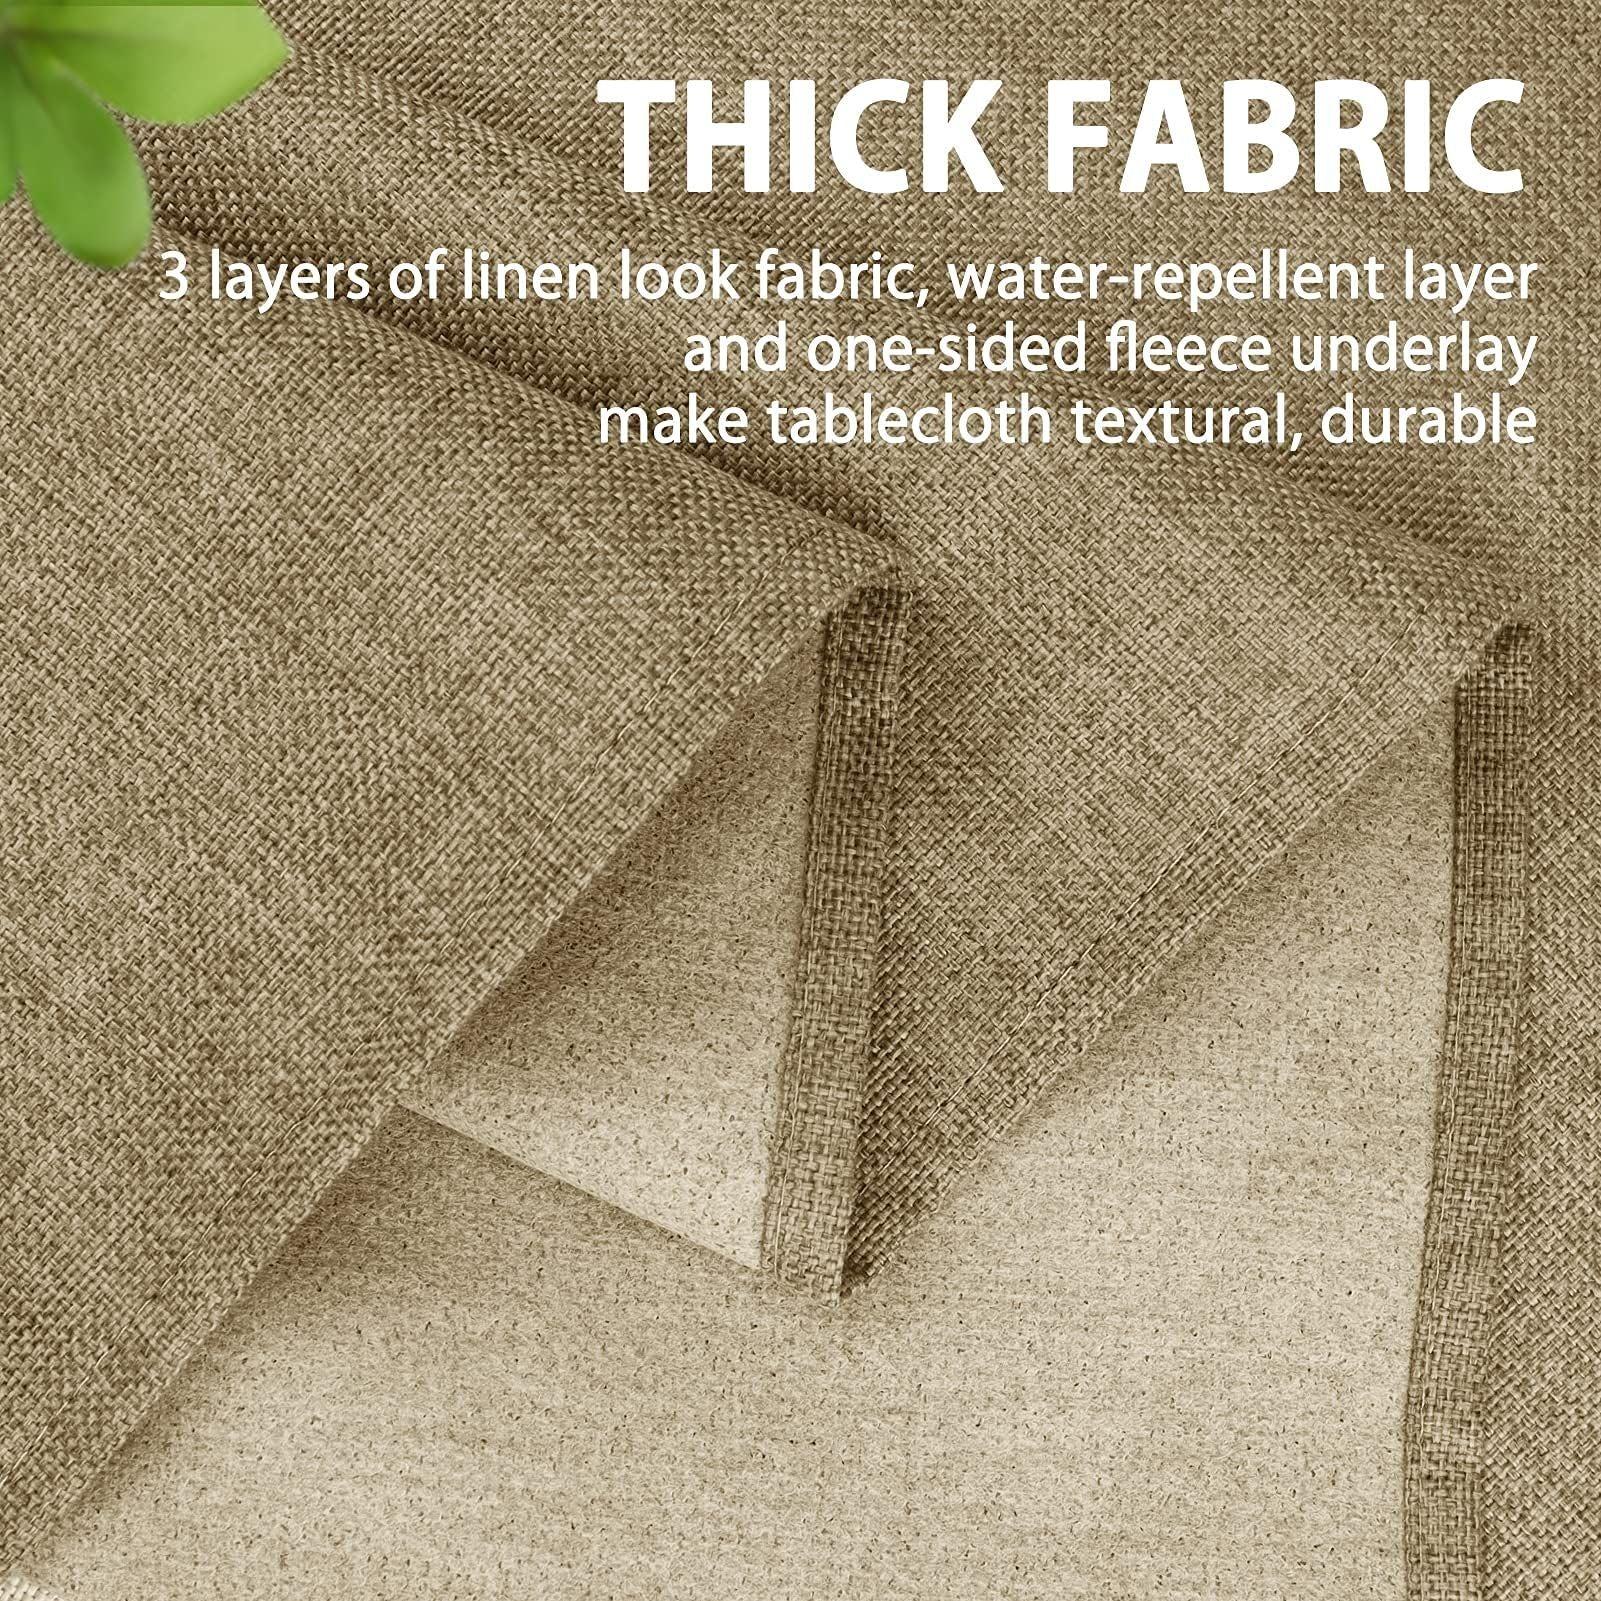 Naturoom Taupe Linen Table Cloth Rectangular Large Table Cloth Rectangle Burlap Fabric Hessian Table Cloth Faux Linen Tablecloths Solid Color Water Repellent Kitchen Dinning 54x108in(137x274cm) 9ft 3